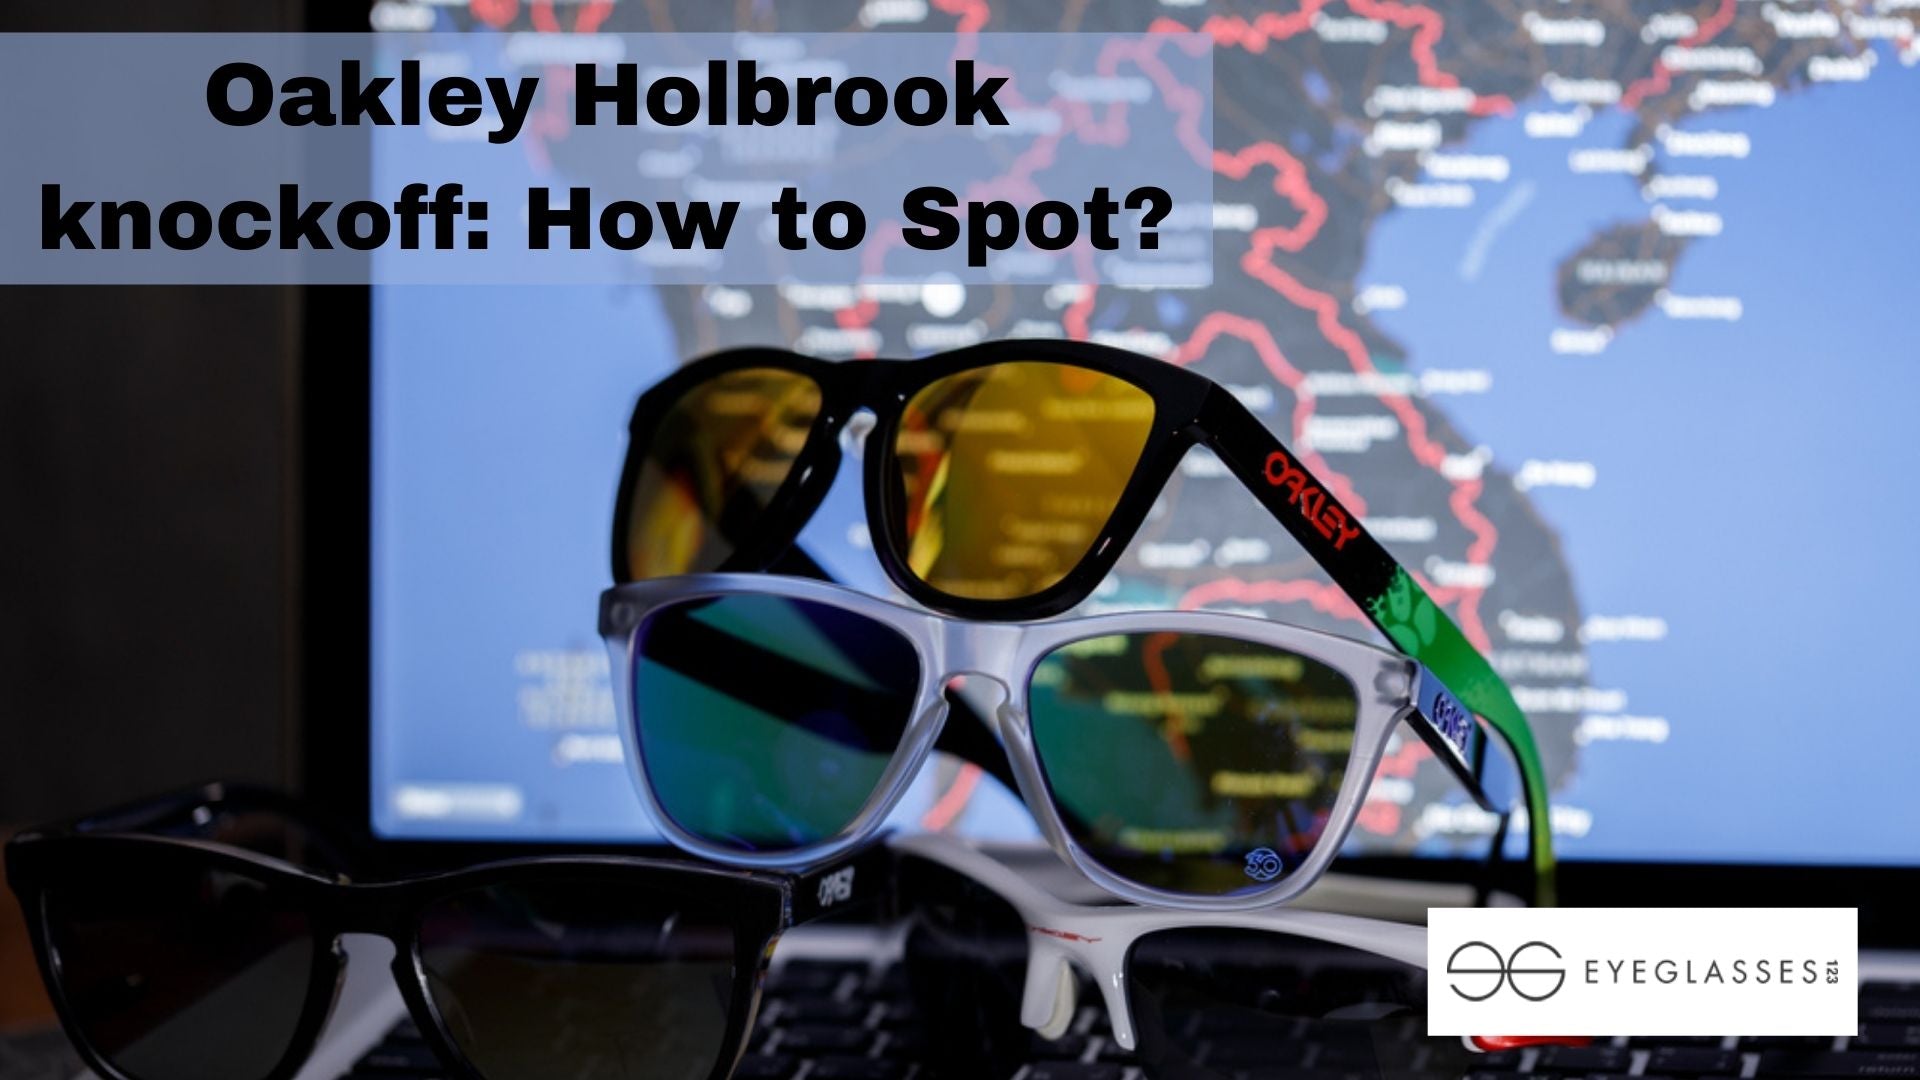 Oakley Holbrook knockoff: How to Spot?